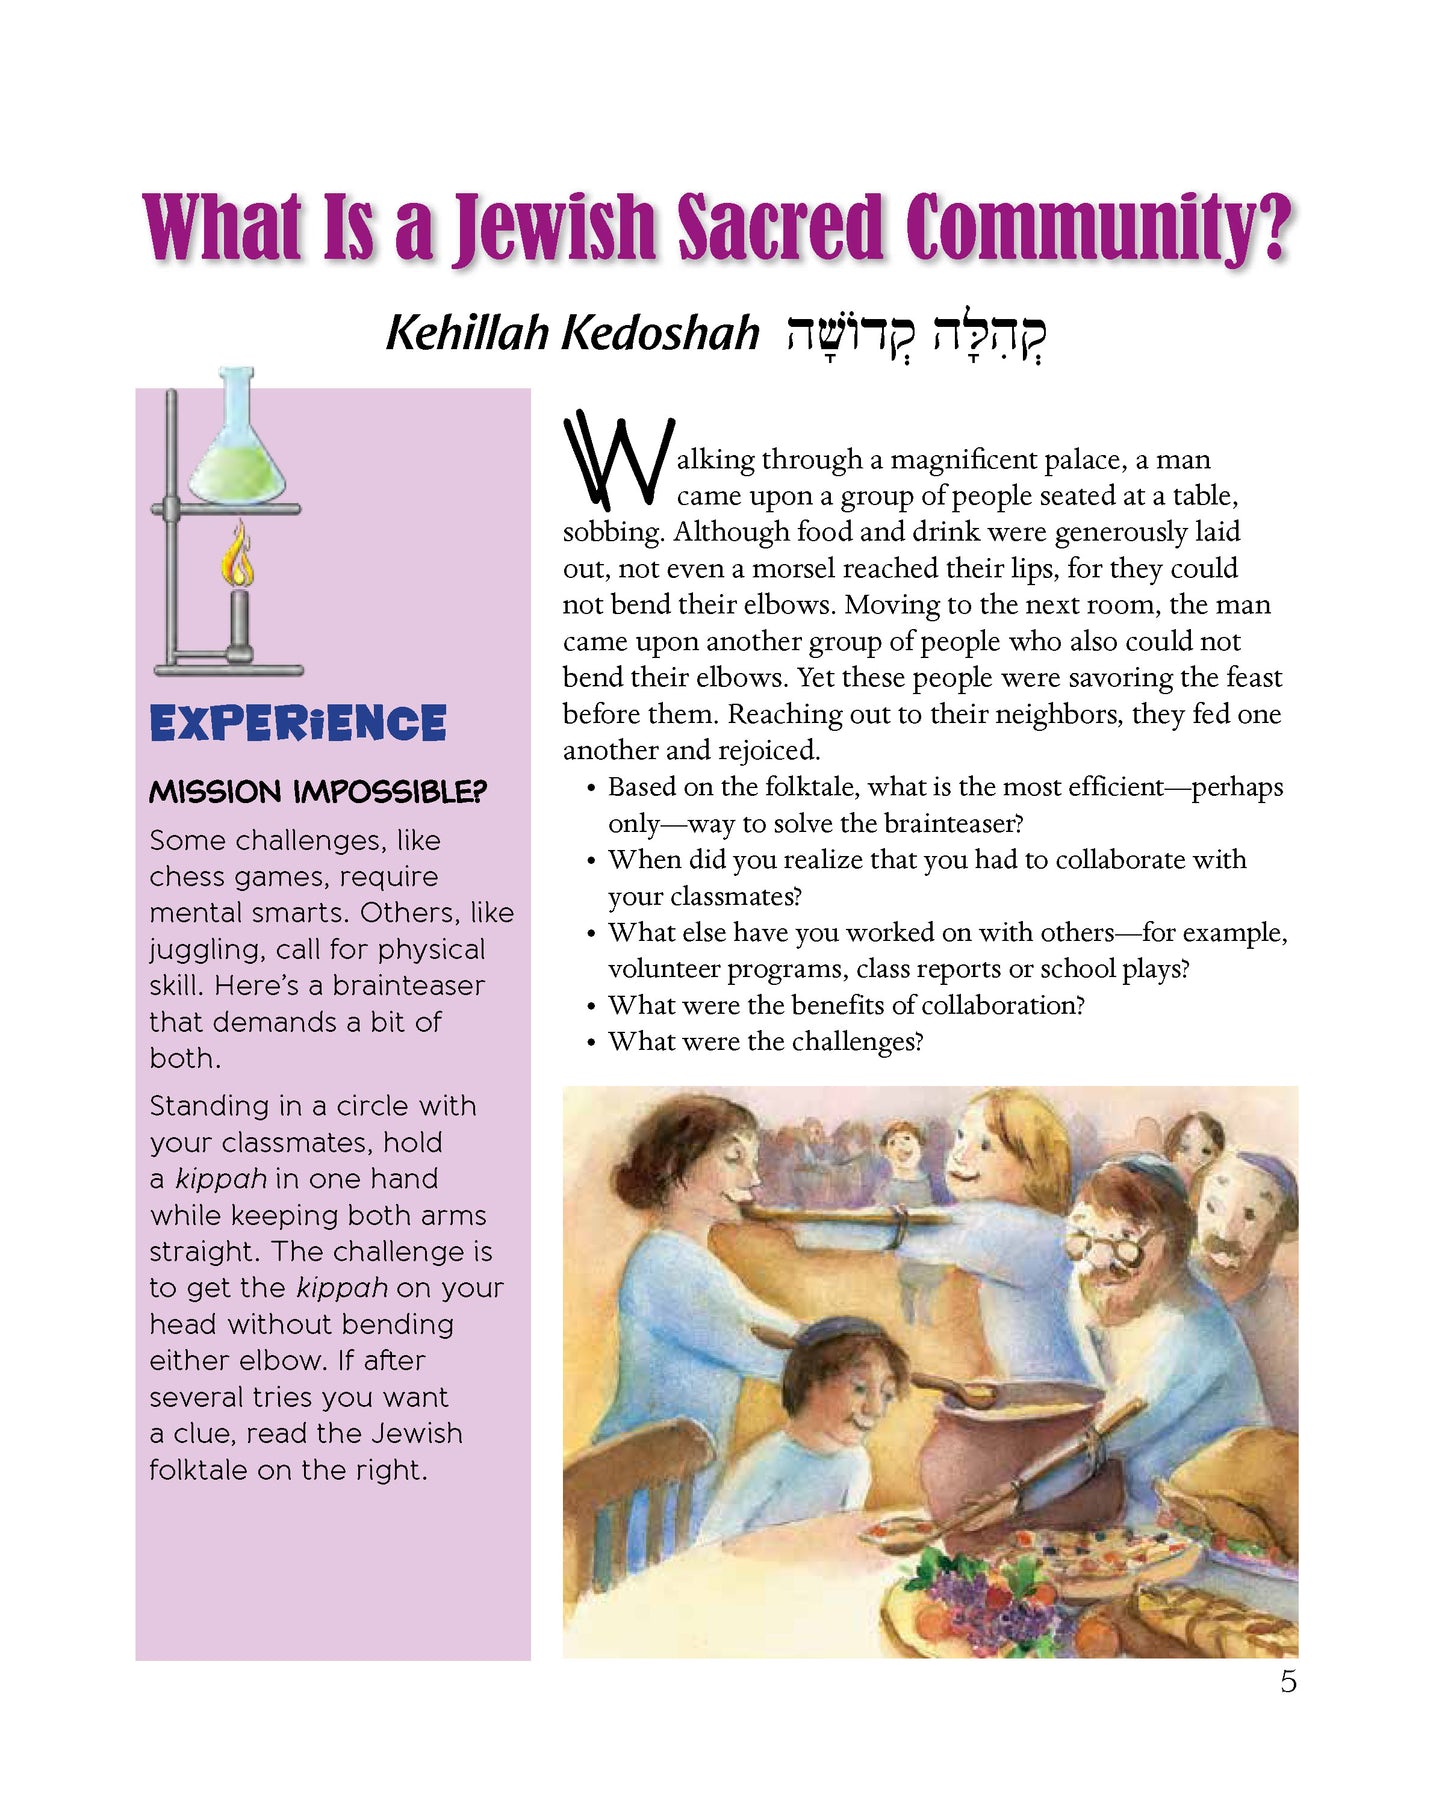 Experiencing Sacred Community